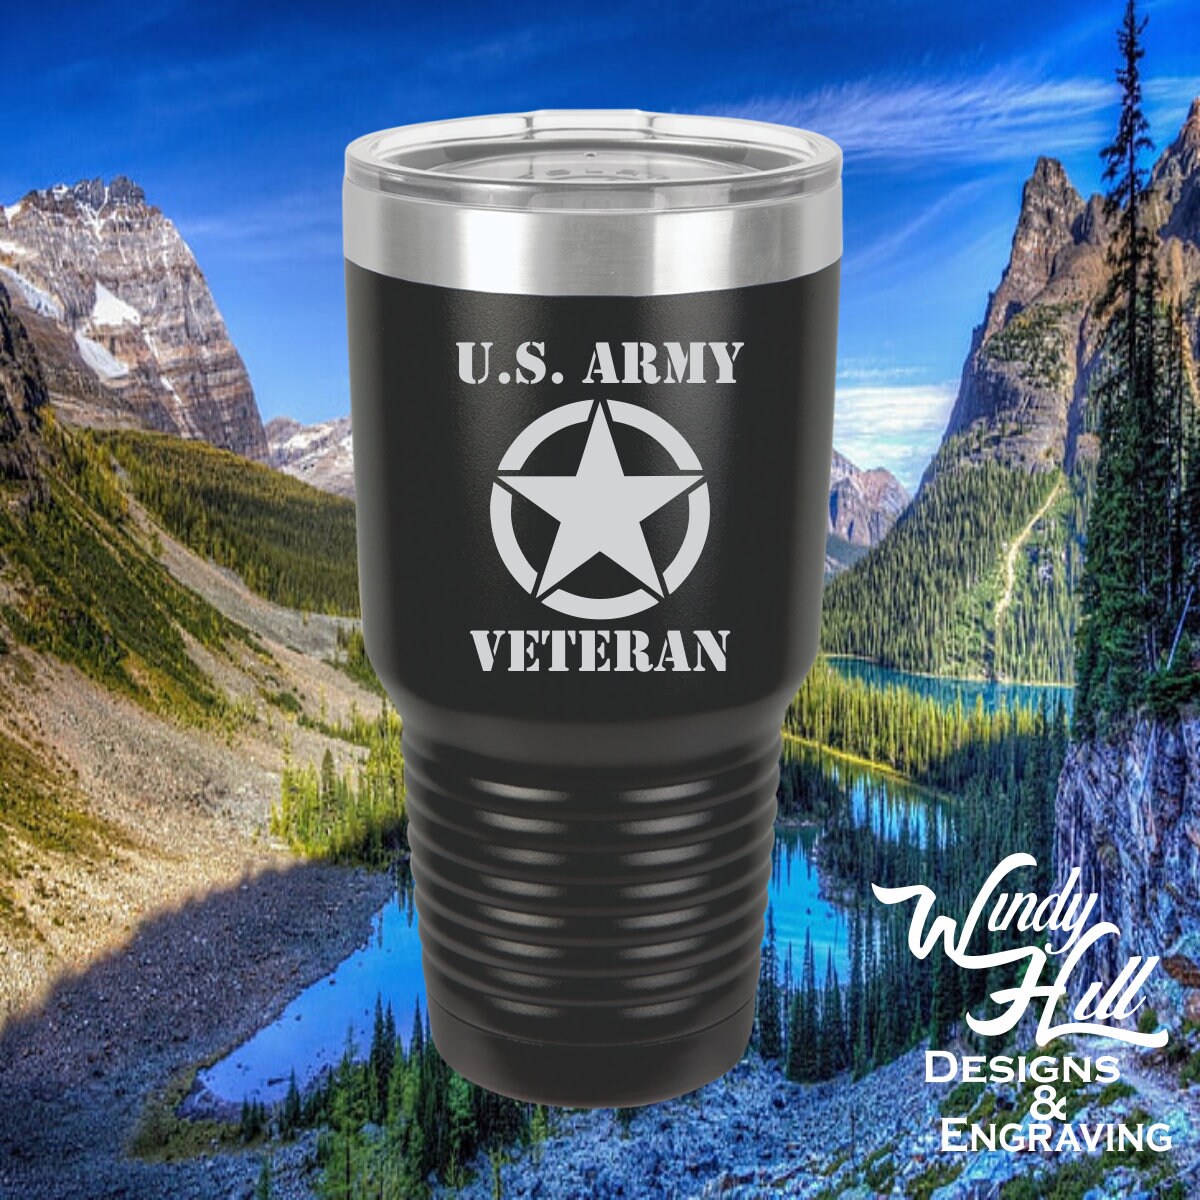 Personalized Olive Yeti Army 20oz Tumbler (w/Yeti options) - 85 themes for  sports, jobs, hobbies, ce…See more Personalized Olive Yeti Army 20oz